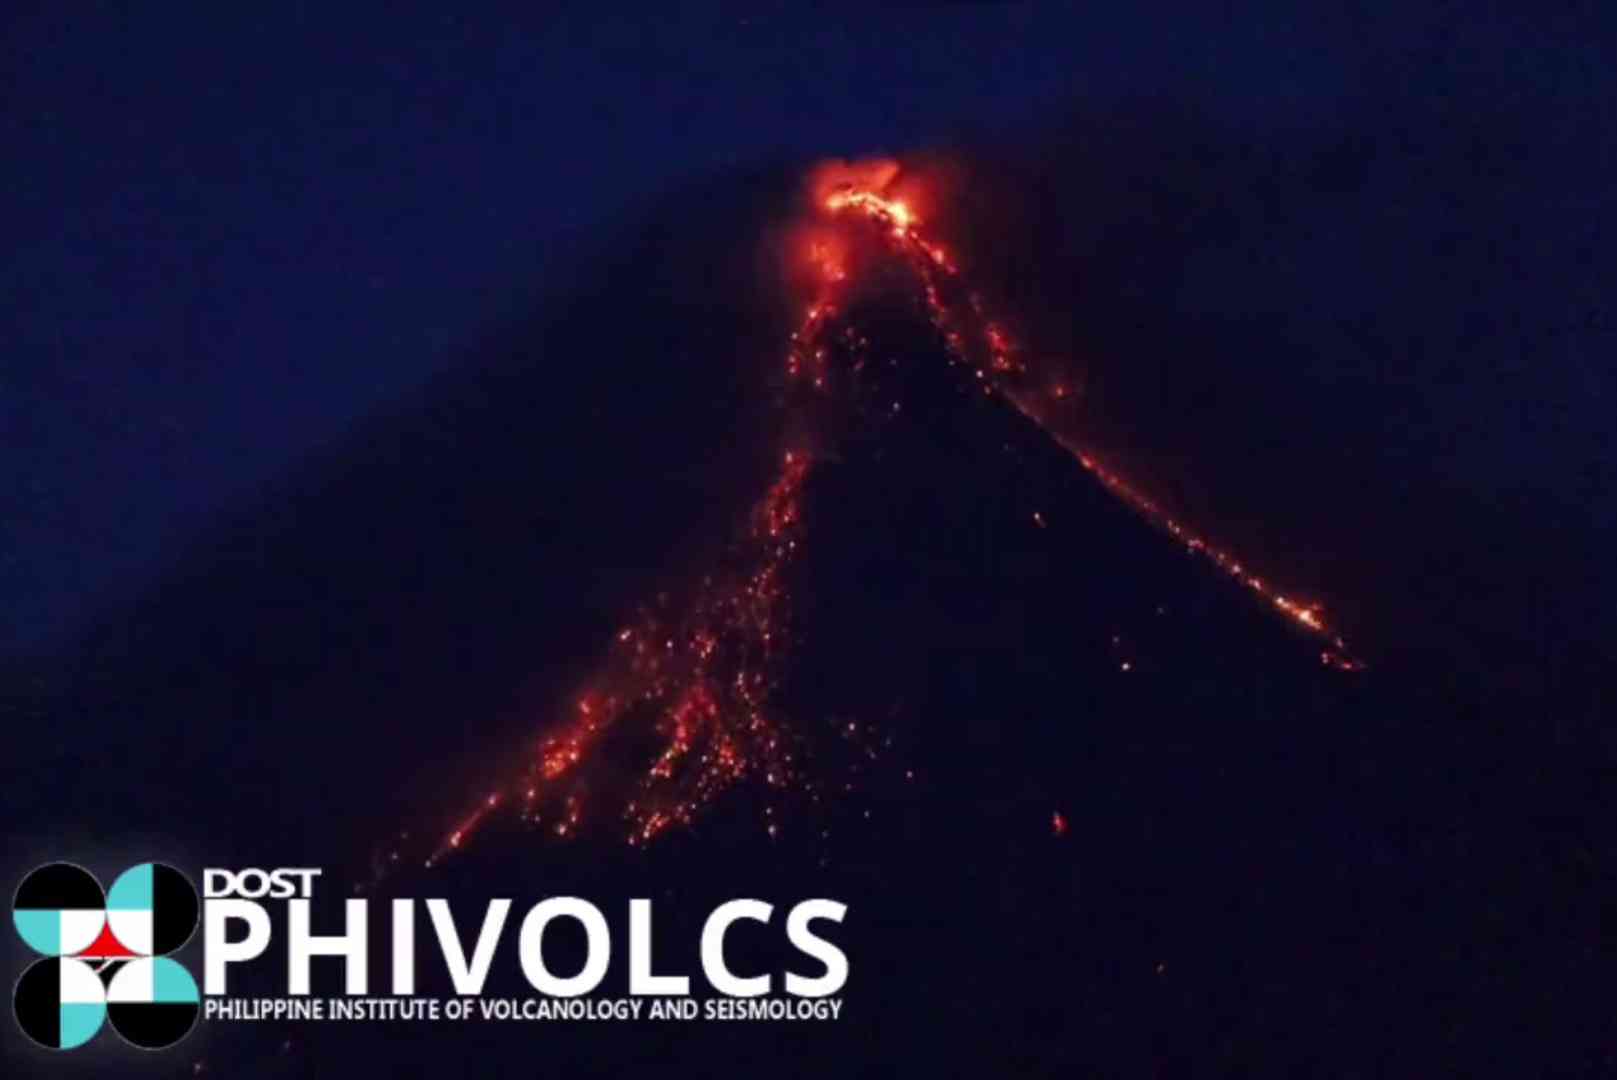 Phivolcs: 57 quakes, 4 ashing events observed in Mayon over past 24 hours